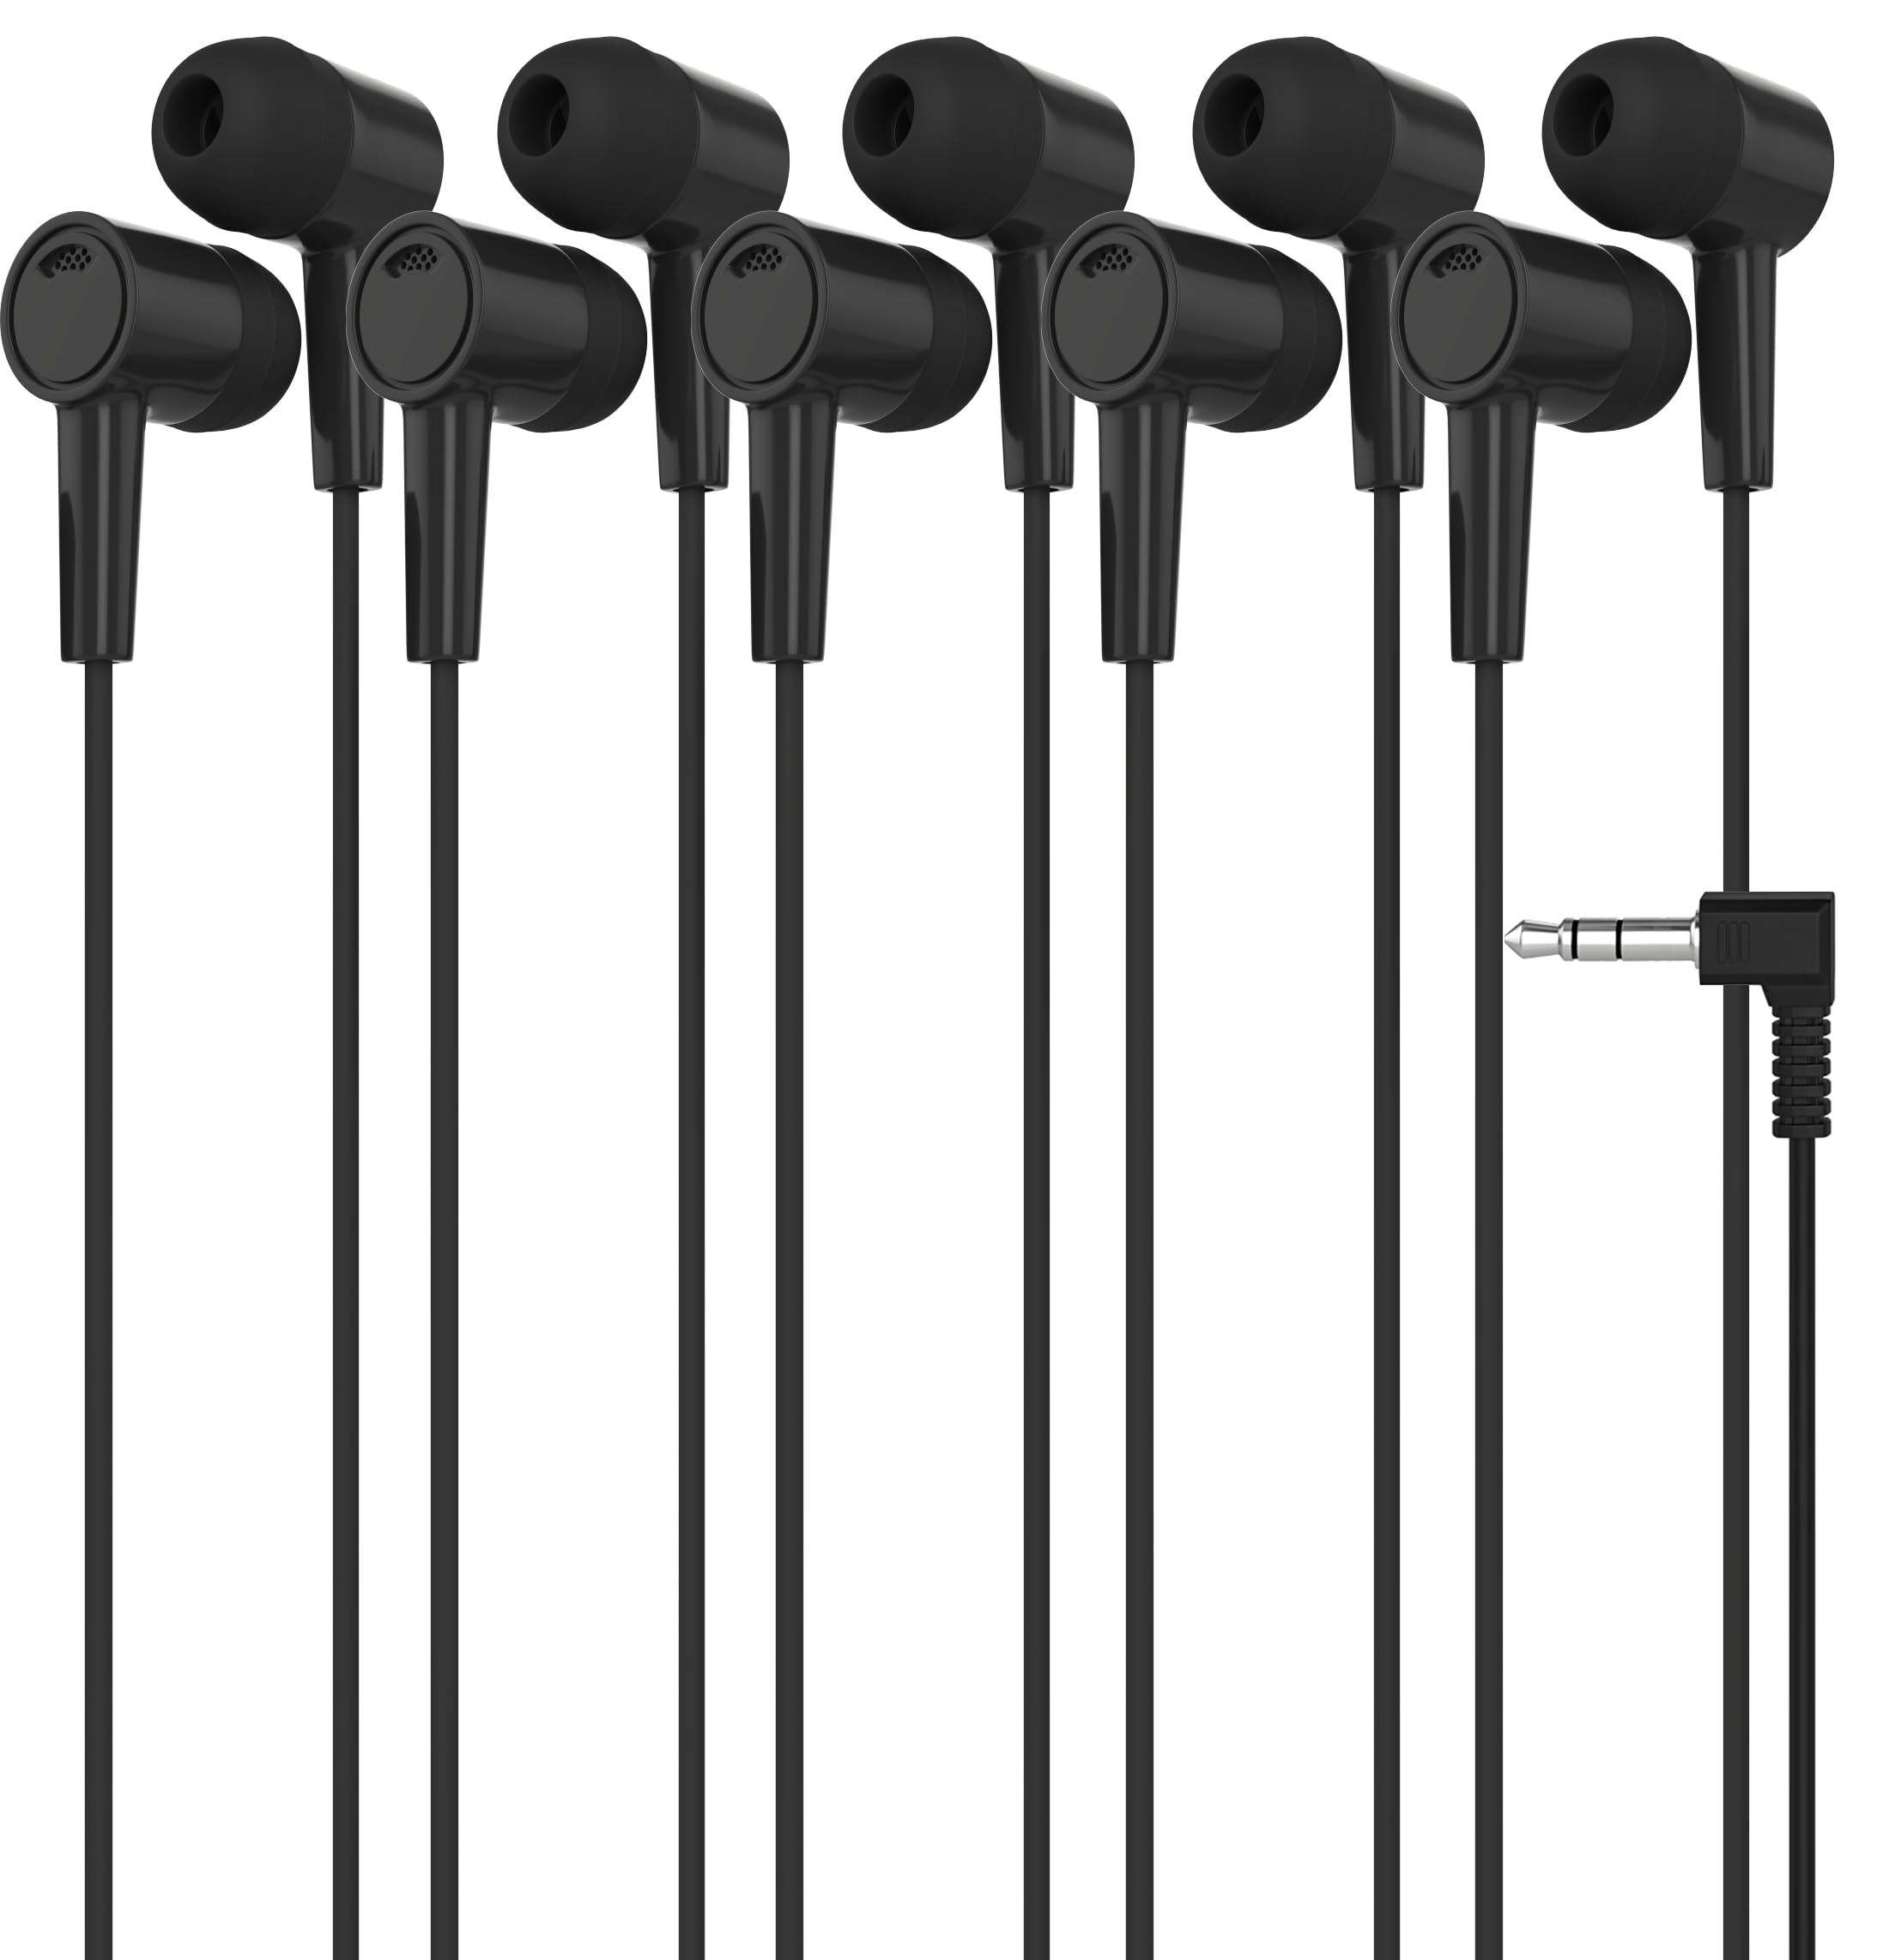 Maeline Bulk Earbuds 5 Pack Black in-Ear Stereo Headphones for School Classroom, Library, Travel, Gym 3.5mm Jack, Tangle-Free Wired Earphones for MP3, Phones, Computer and Laptops